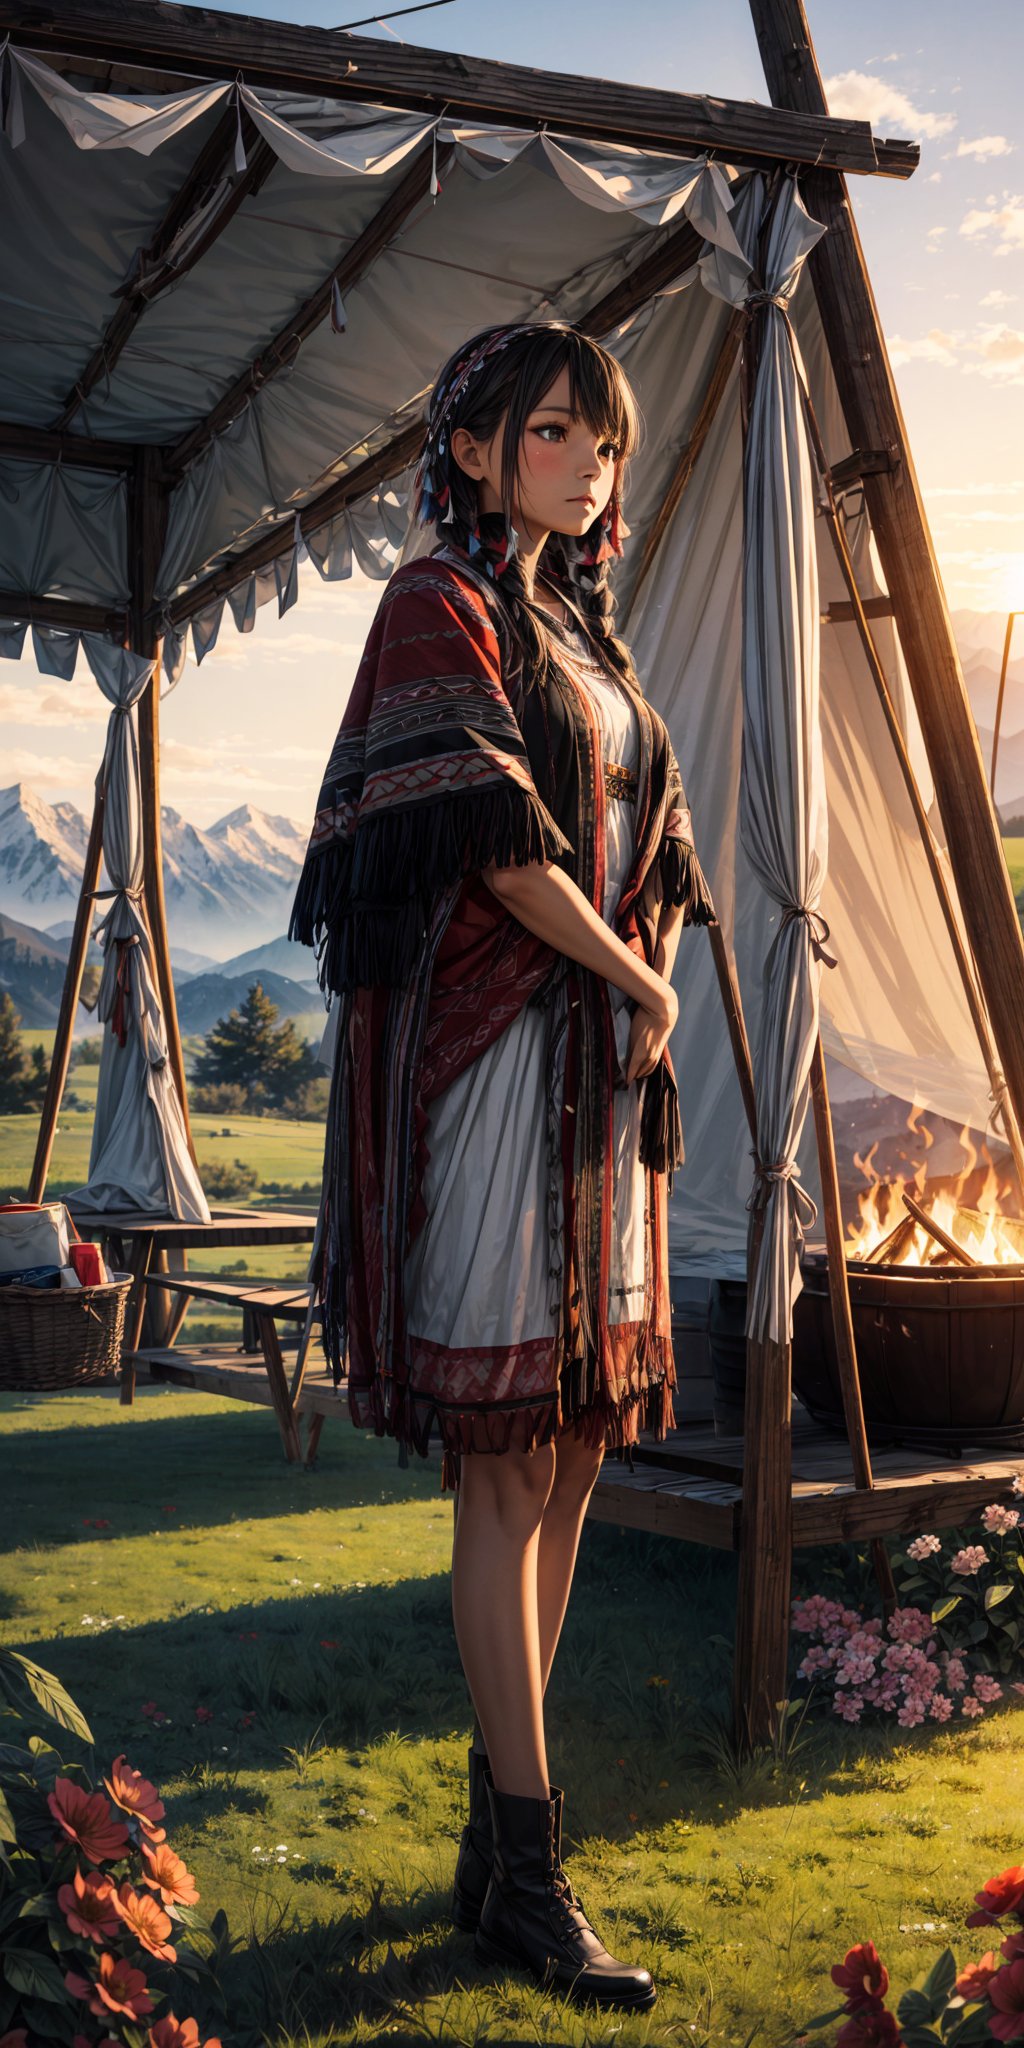 sunrisesummer, flowers, luscious grass, indigenous girl, hunter, aboriginal, standing, looking at the mountains, beautiful detailed, teepee, campfire,